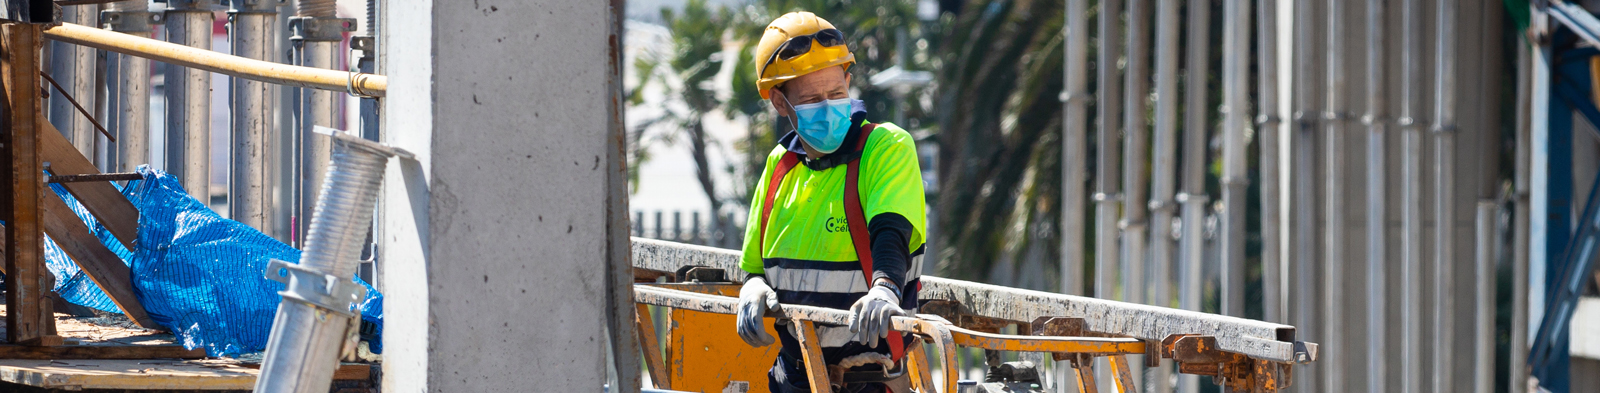 worker on building site with hi-vis jacket and face mask